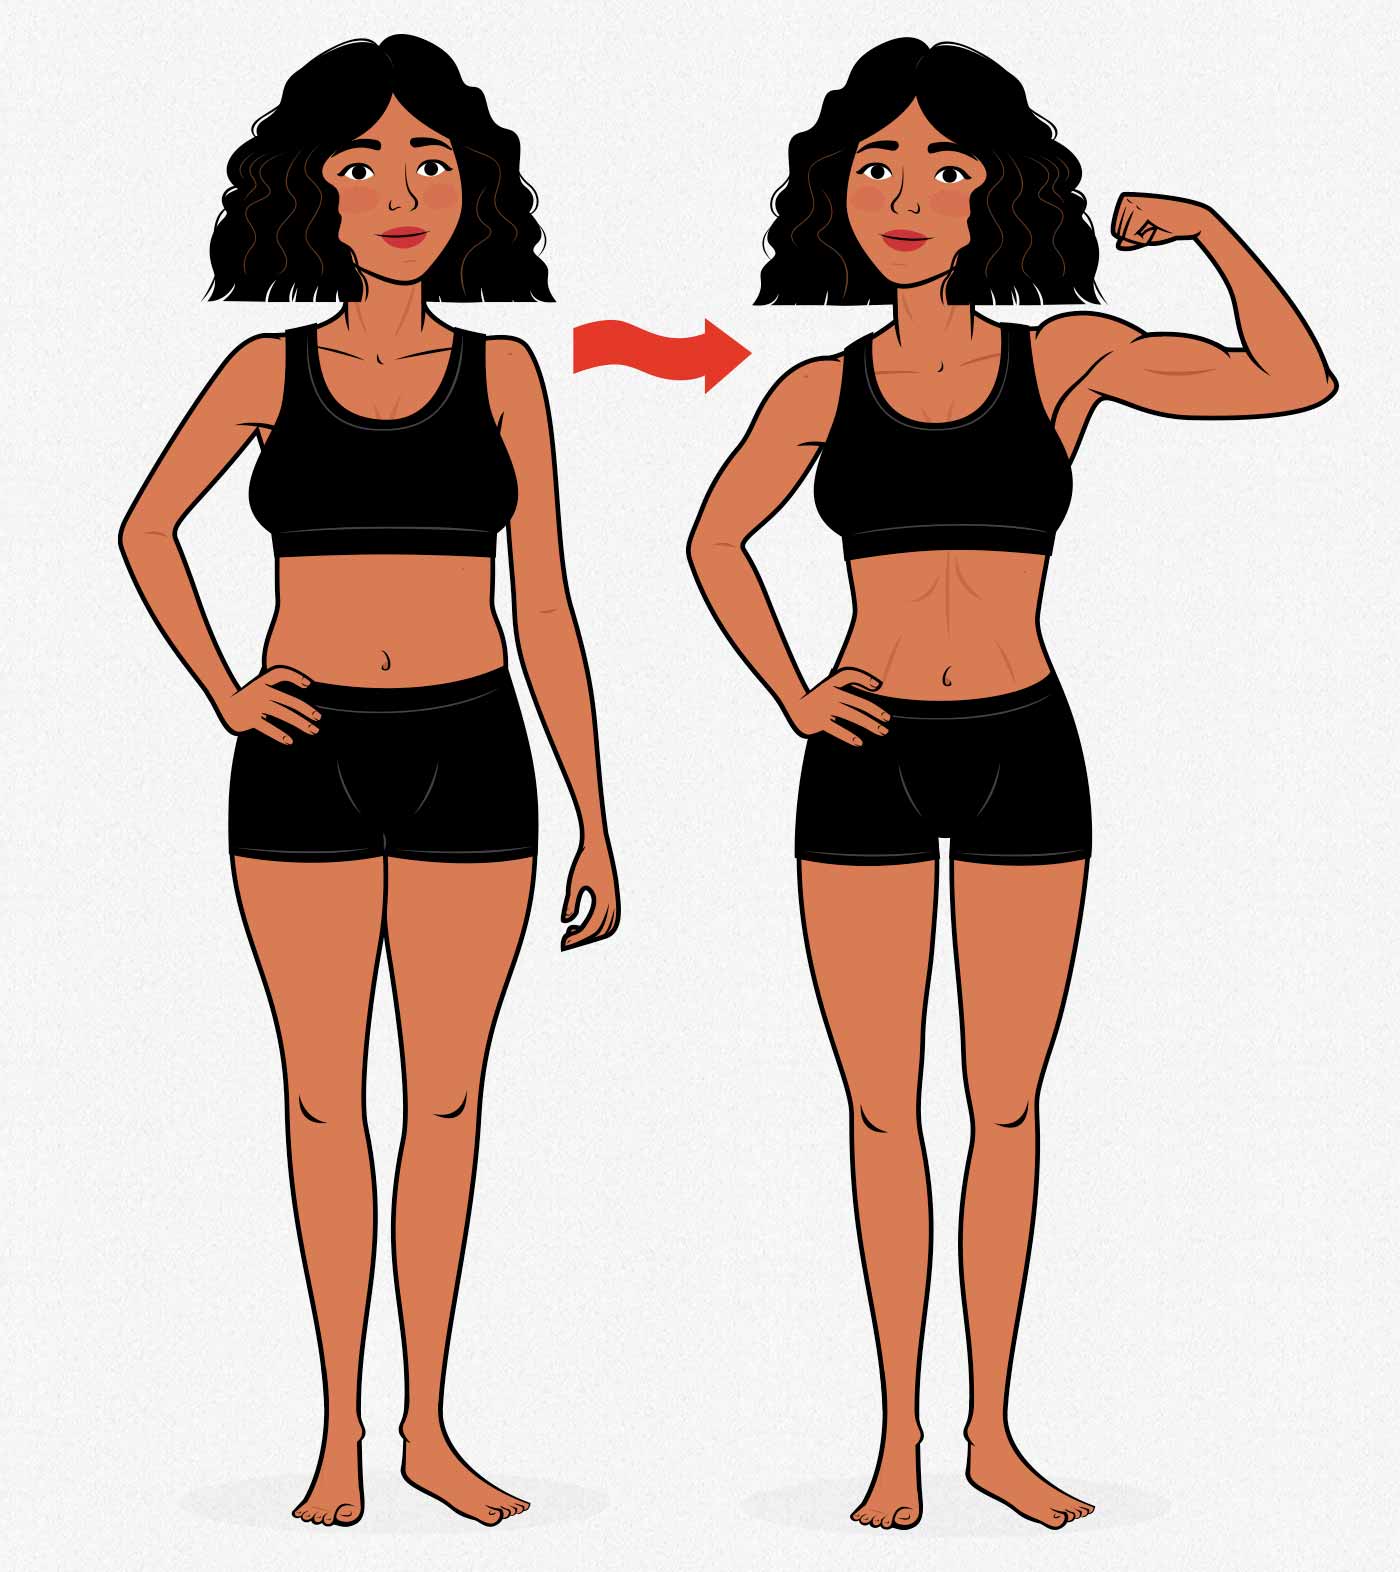 Before and after illustration showing a skinny-fat woman becoming lean and strong.